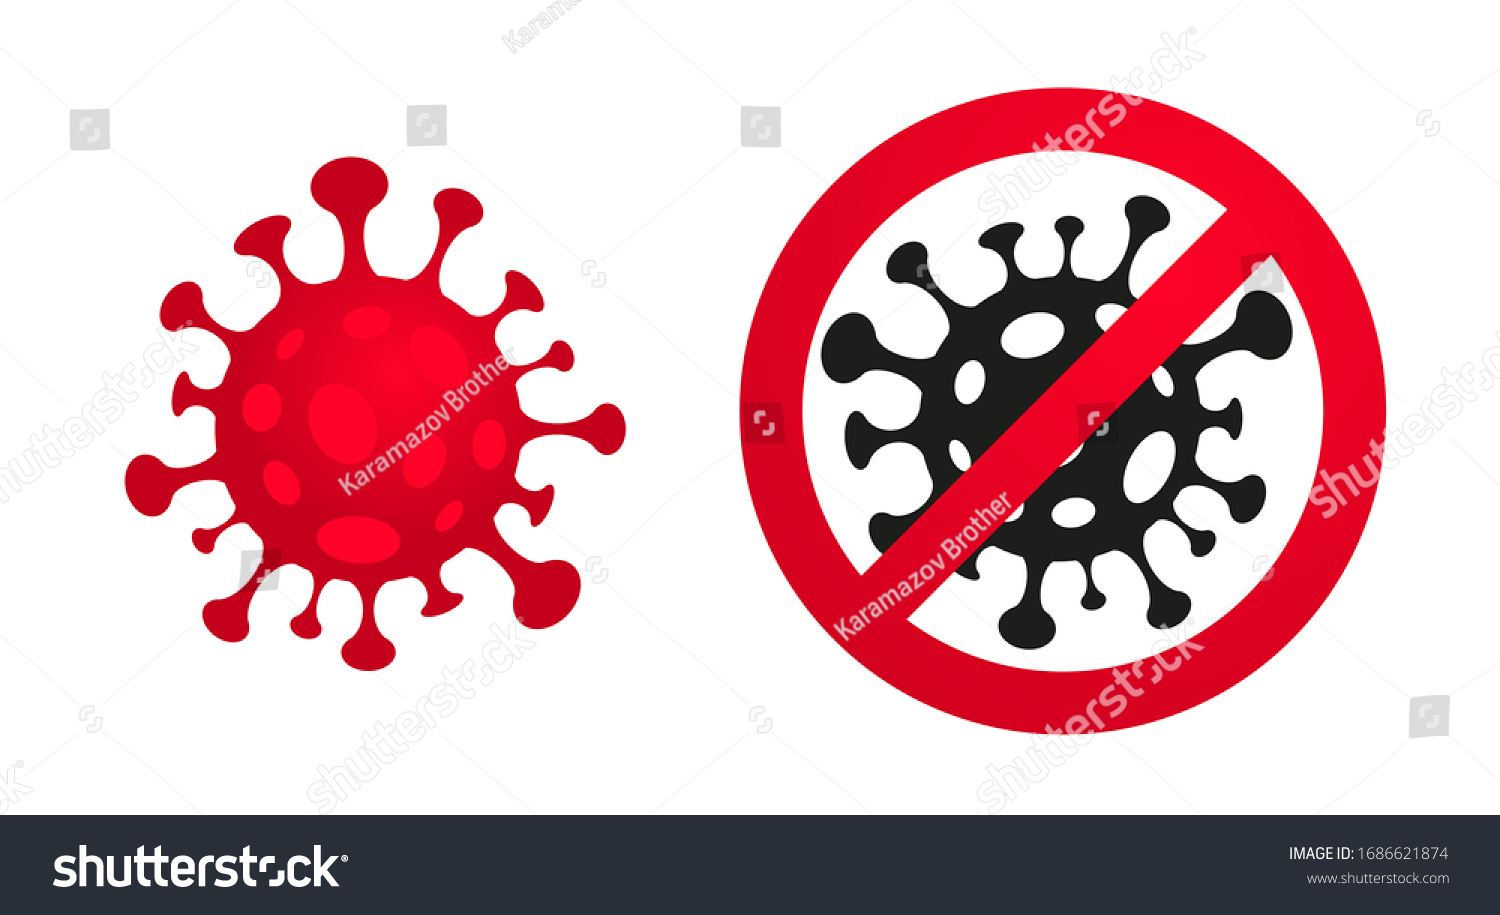 Coronavirus, 2019-nCoV, Covid-19. Vector concept abstract illustration STOP CORONAVIRUS. Flat outline icons of a virus and a stop sign (crossed out), coronavirus sing isolated on white background #1686621874